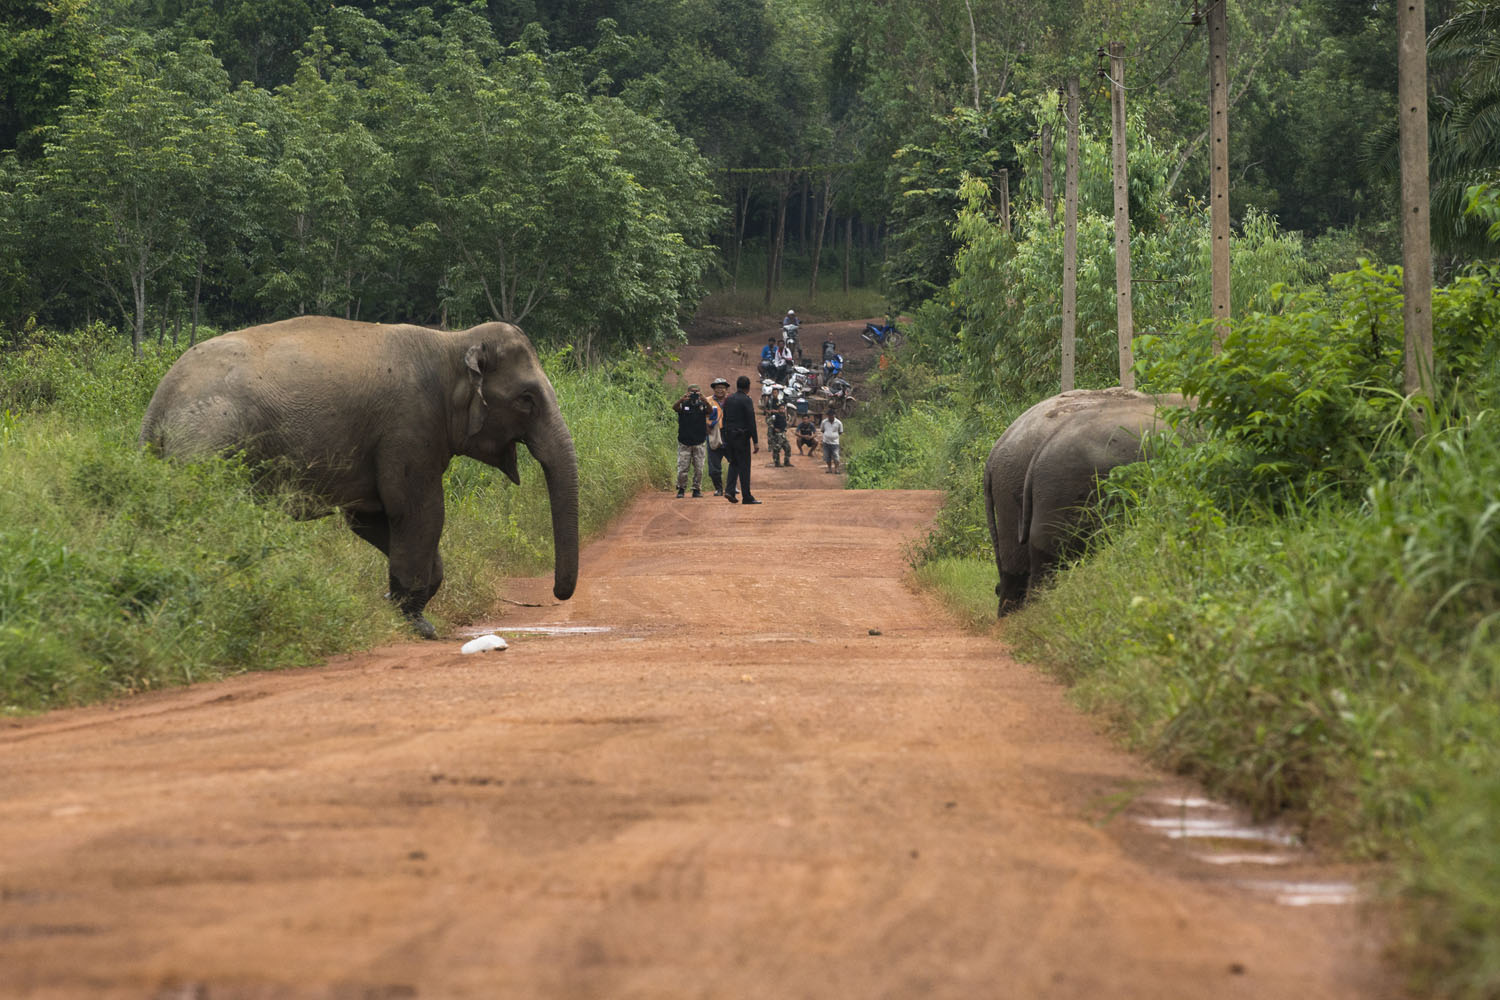 Police and wildlife officials hold back traffic while approximately 40 elephants emerge from the jungle in the early hours of a recent evening. It is thought approximately 150 elephants live in and around Chanthaburi province’s Kaeng Hang Meao district, an area home to about 36,000 human residents.